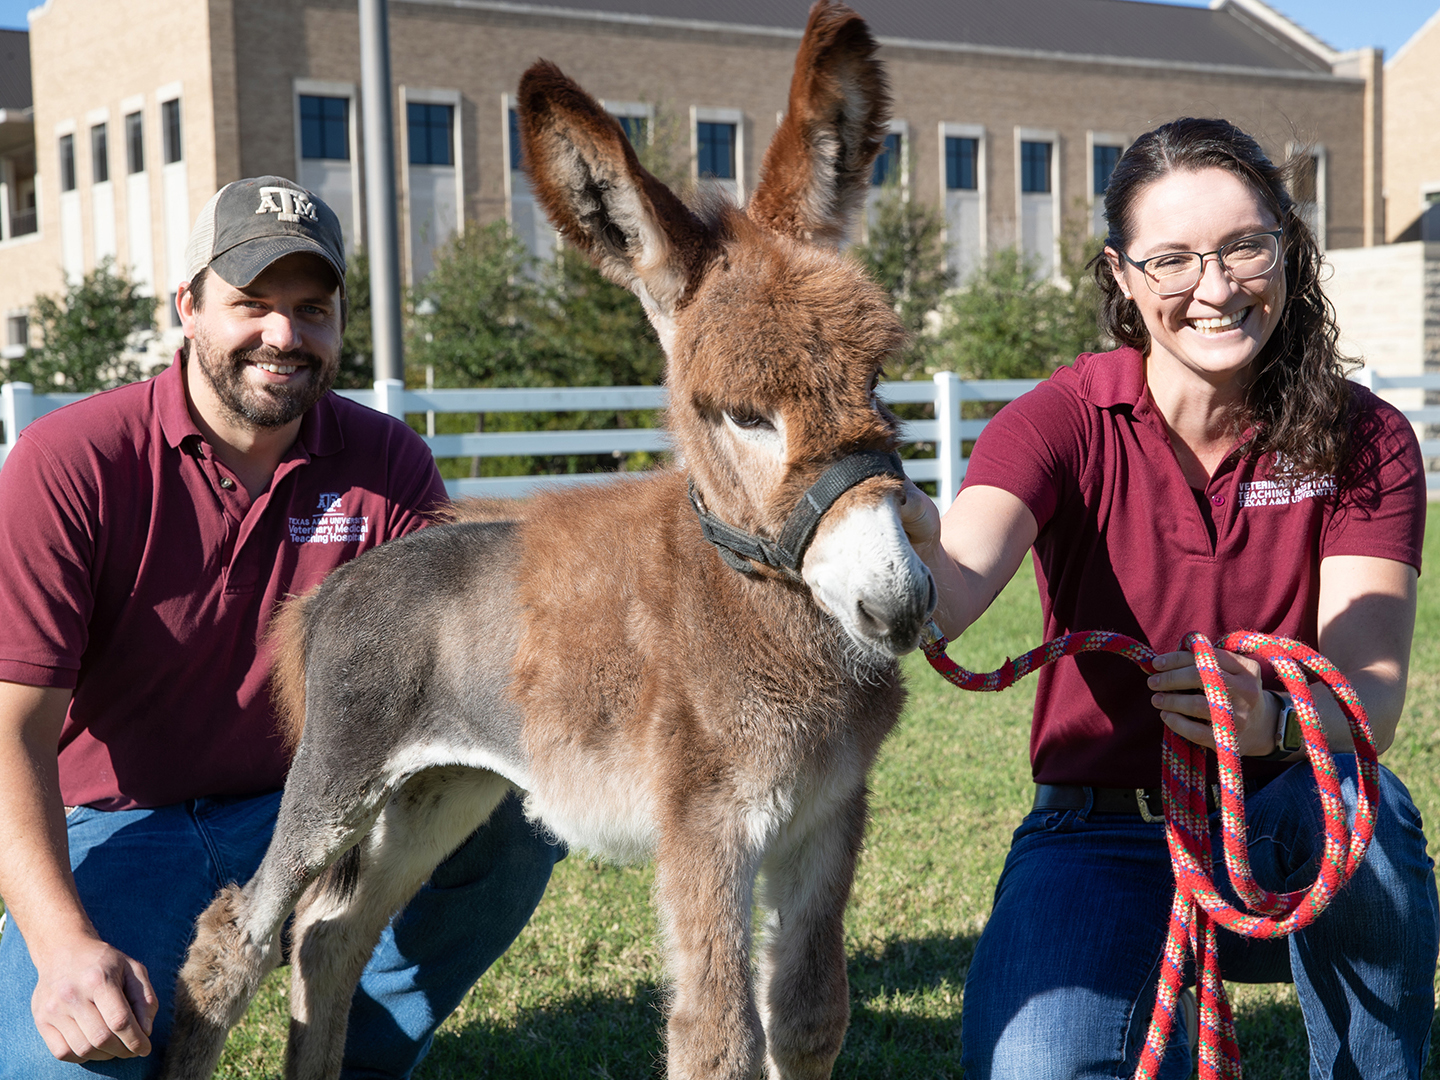 Two veterinarians and a baby donkey outside in a yard